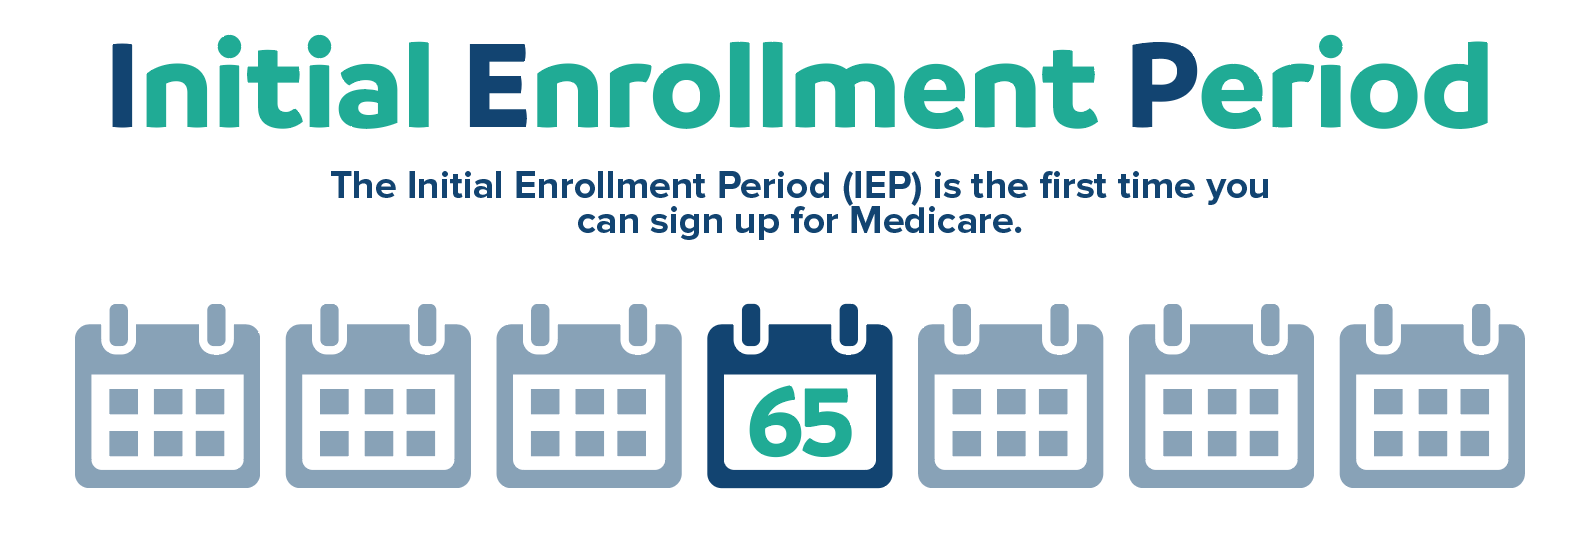 Initial enrollment period calendar with graphic explaining when initial enrollment period starts and ends